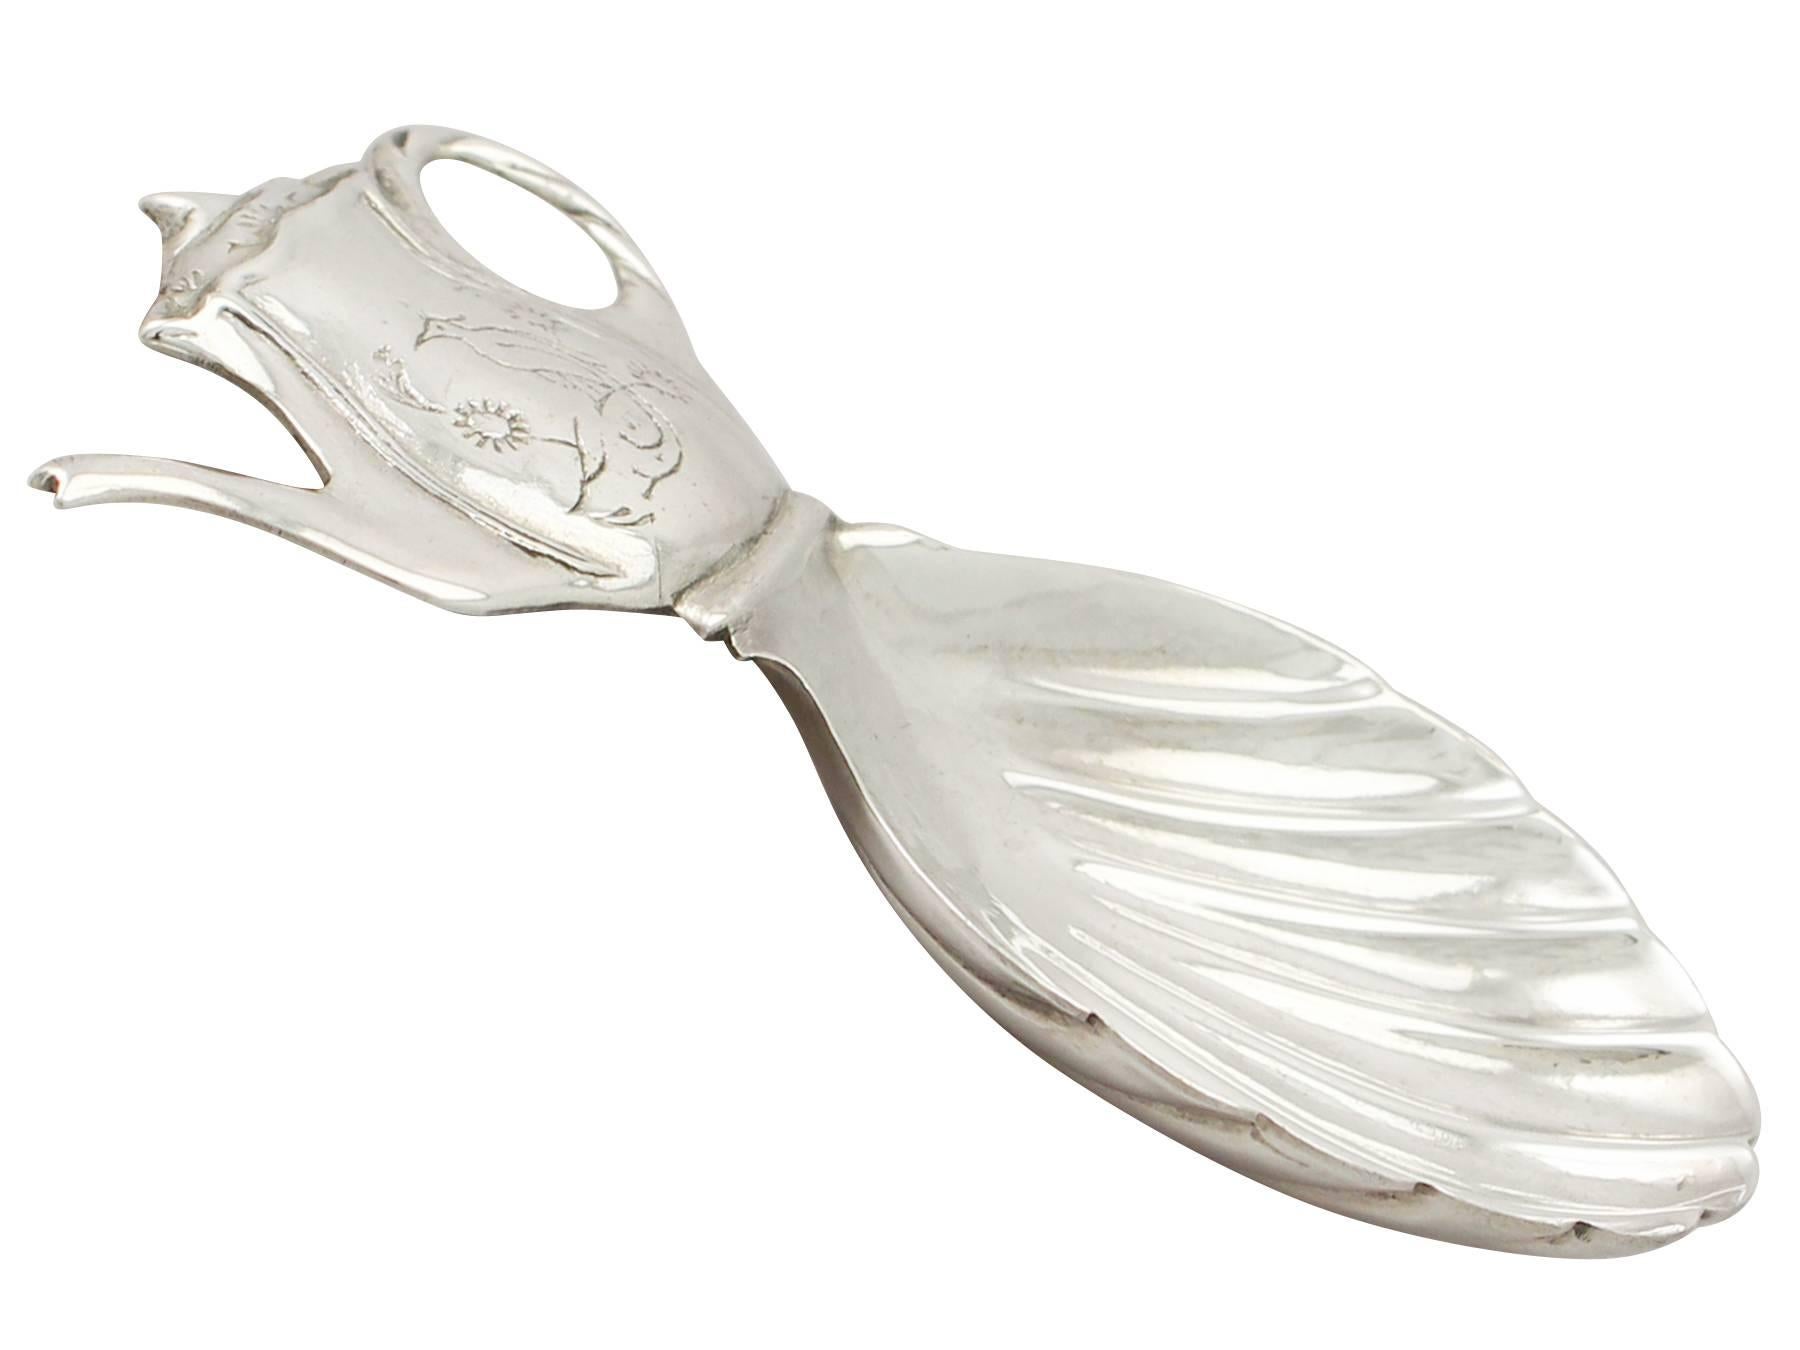 A fine and impressive, unusual vintage George VI English sterling silver caddy spoon; an addition to our teaware collection.

This fine vintage George VI sterling silver caddy spoon has an embossed shell shaped bowl.

The handle is realistically